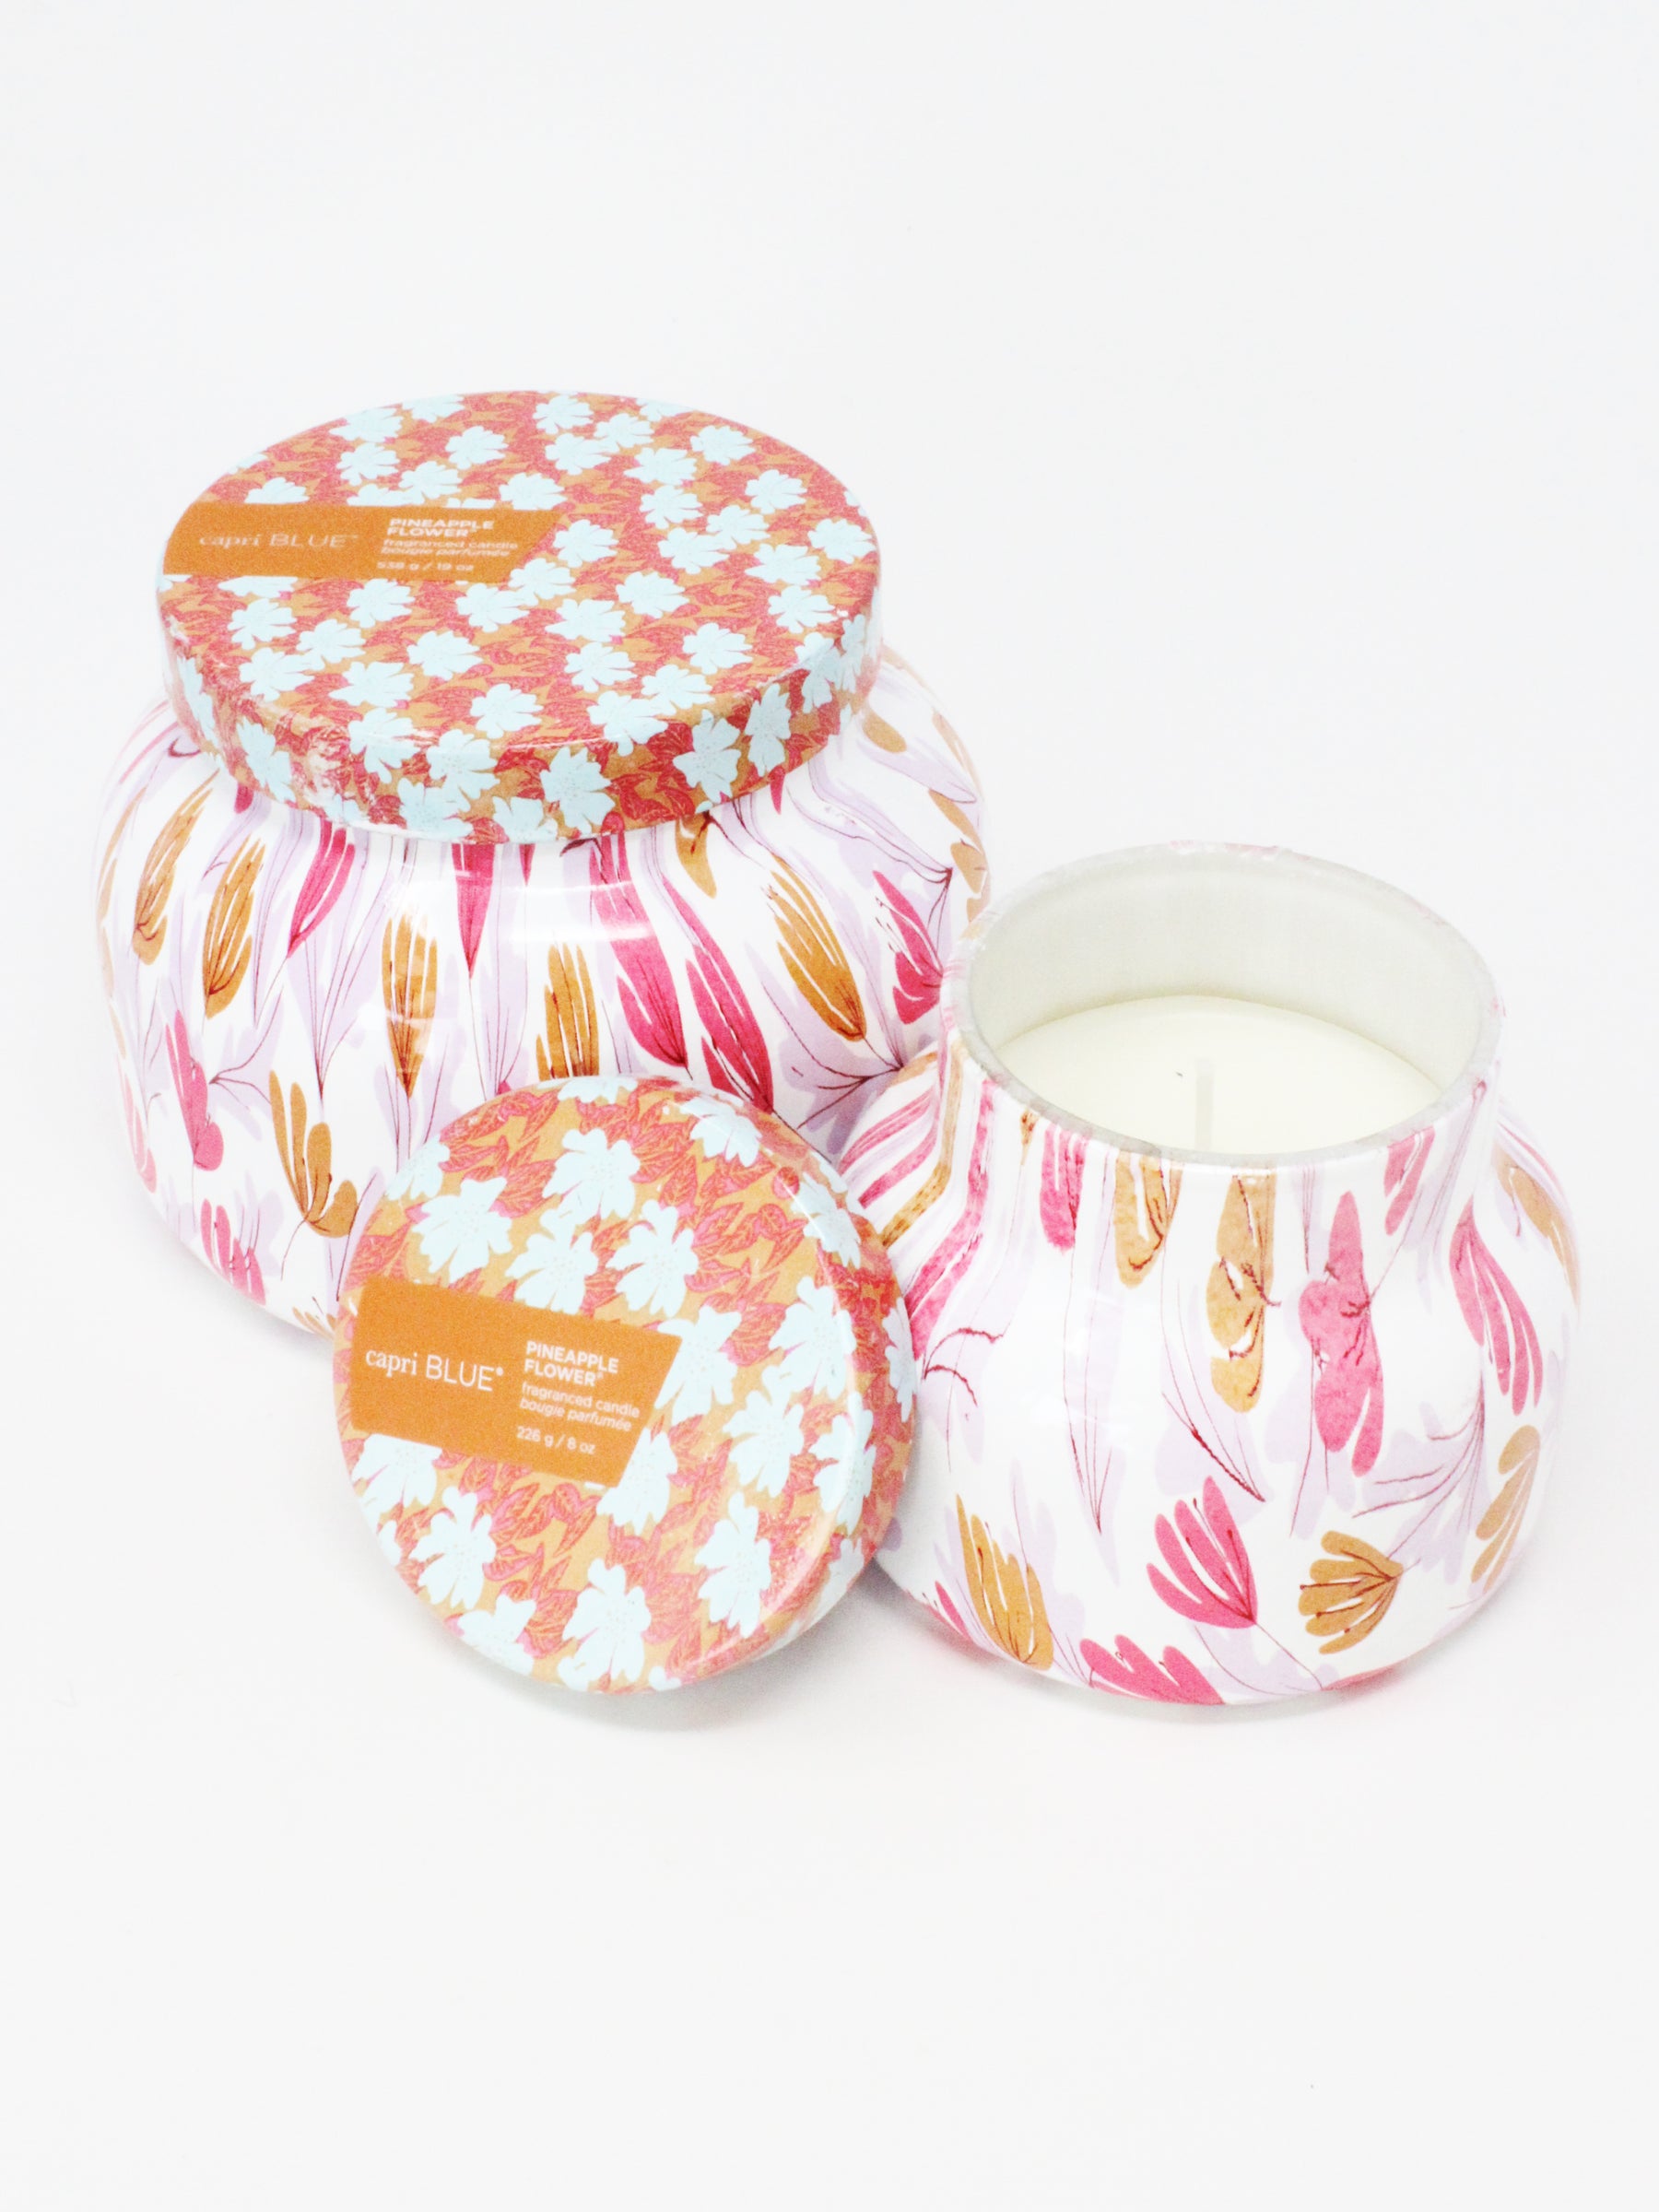 Pattern Play Jar Candle- Pineapple Flower